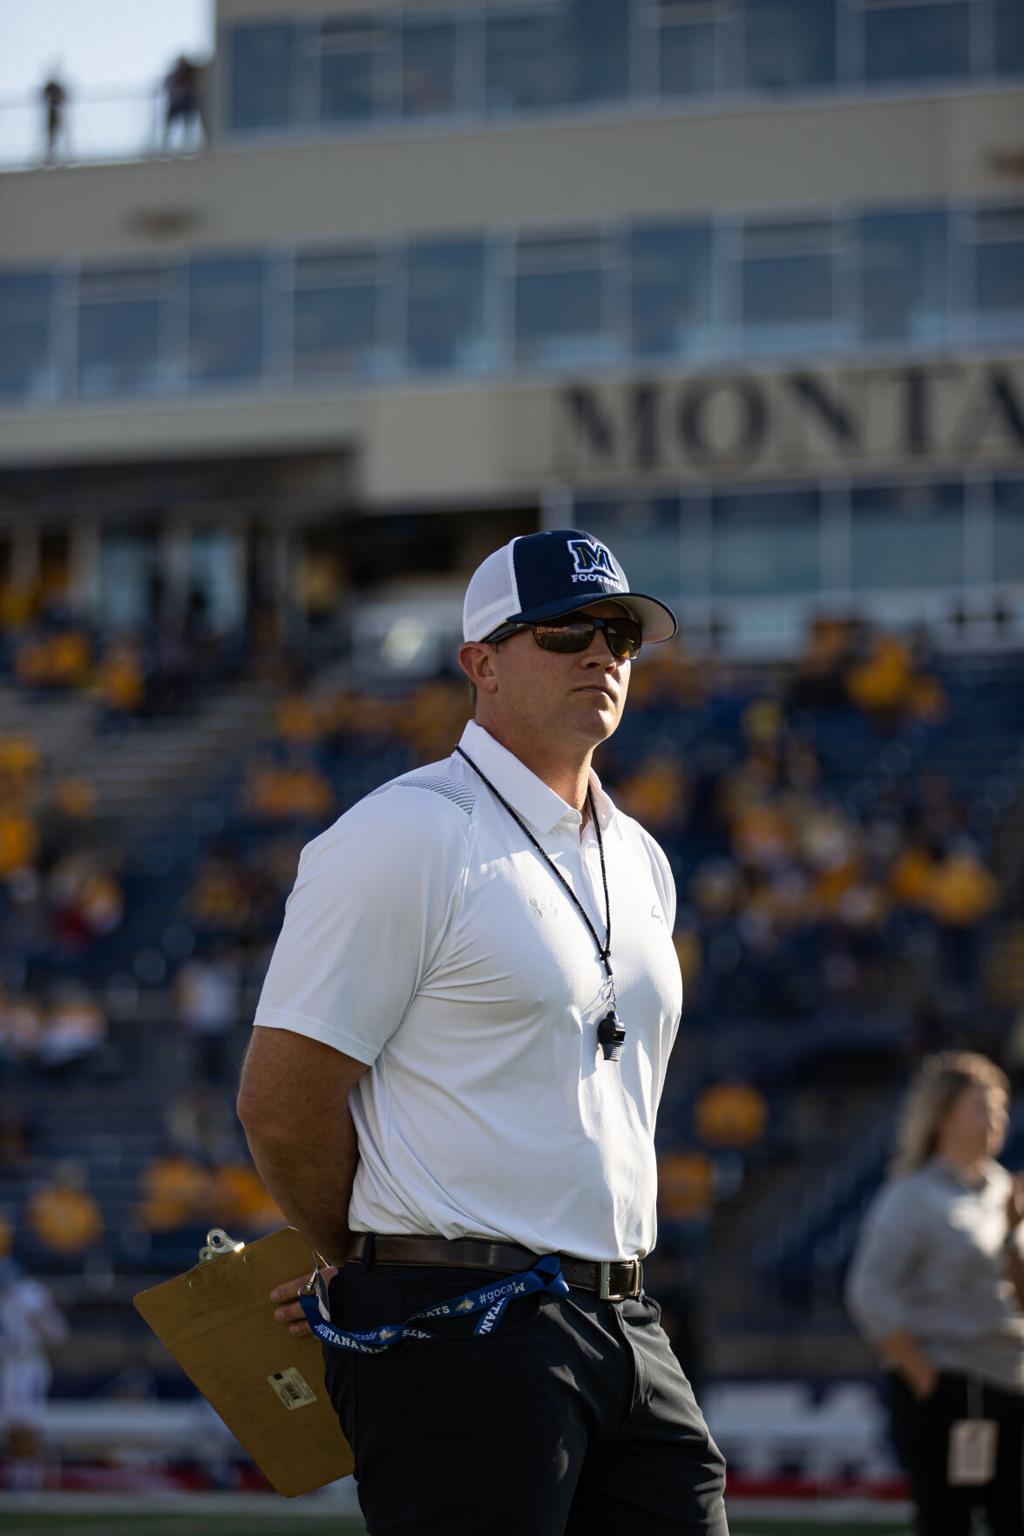 Strength and conditioning coach Sean Herrin pushes Montana State to 'work  in the dark' for continued success | Bobcats Football |  